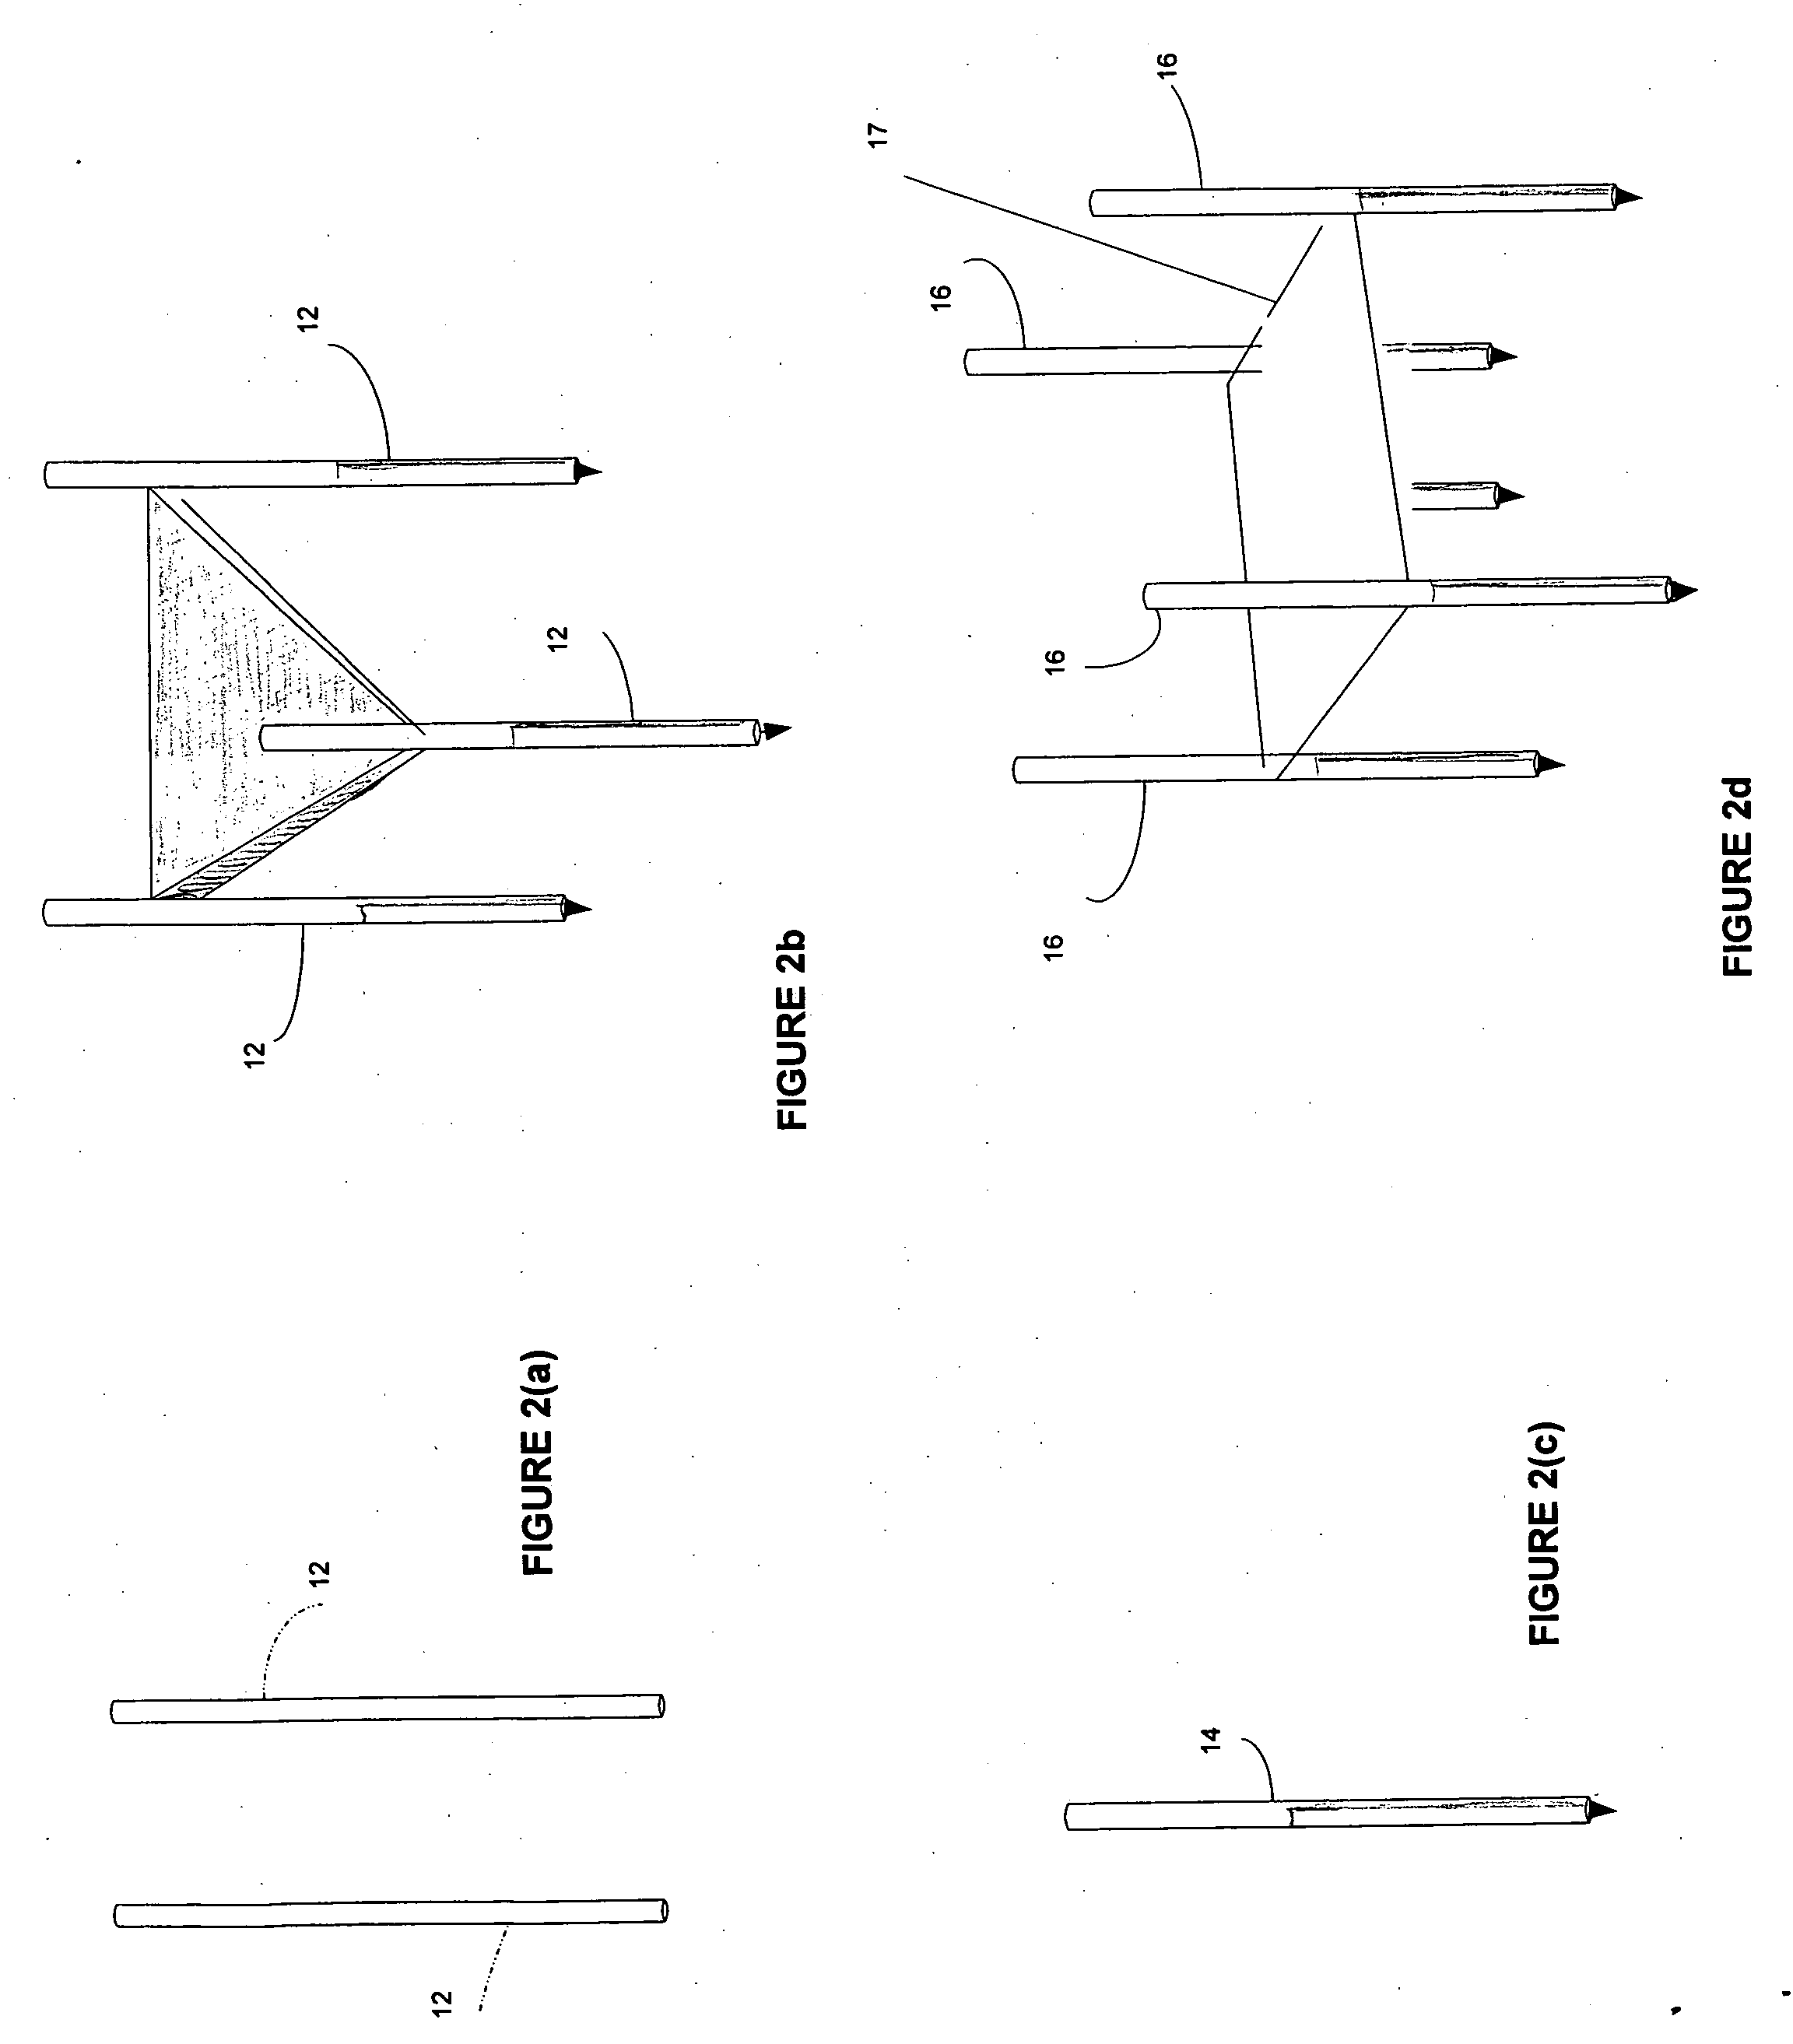 Methods and systems for treating restenosis sites using electroporation